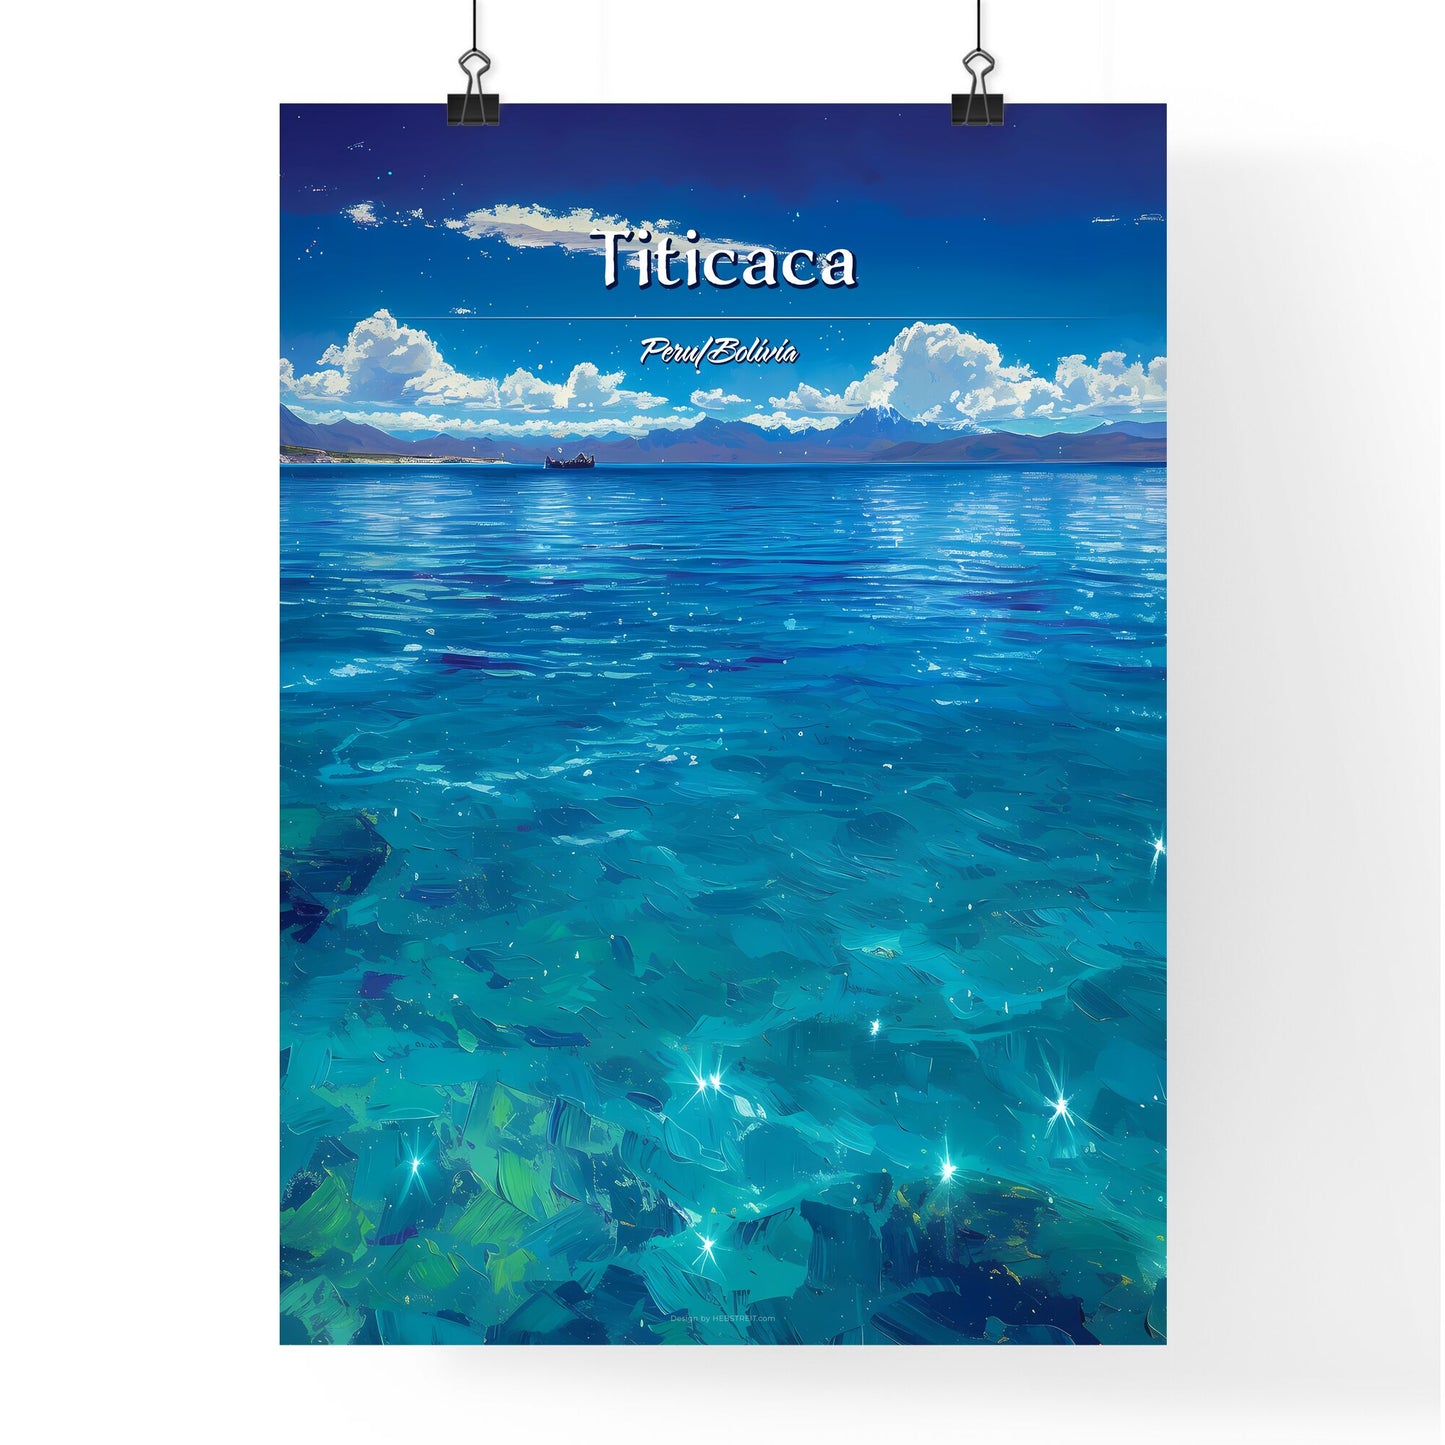 Titicaca, Peru/Bolivia - Art print of a body of water with mountains in the background Default Title